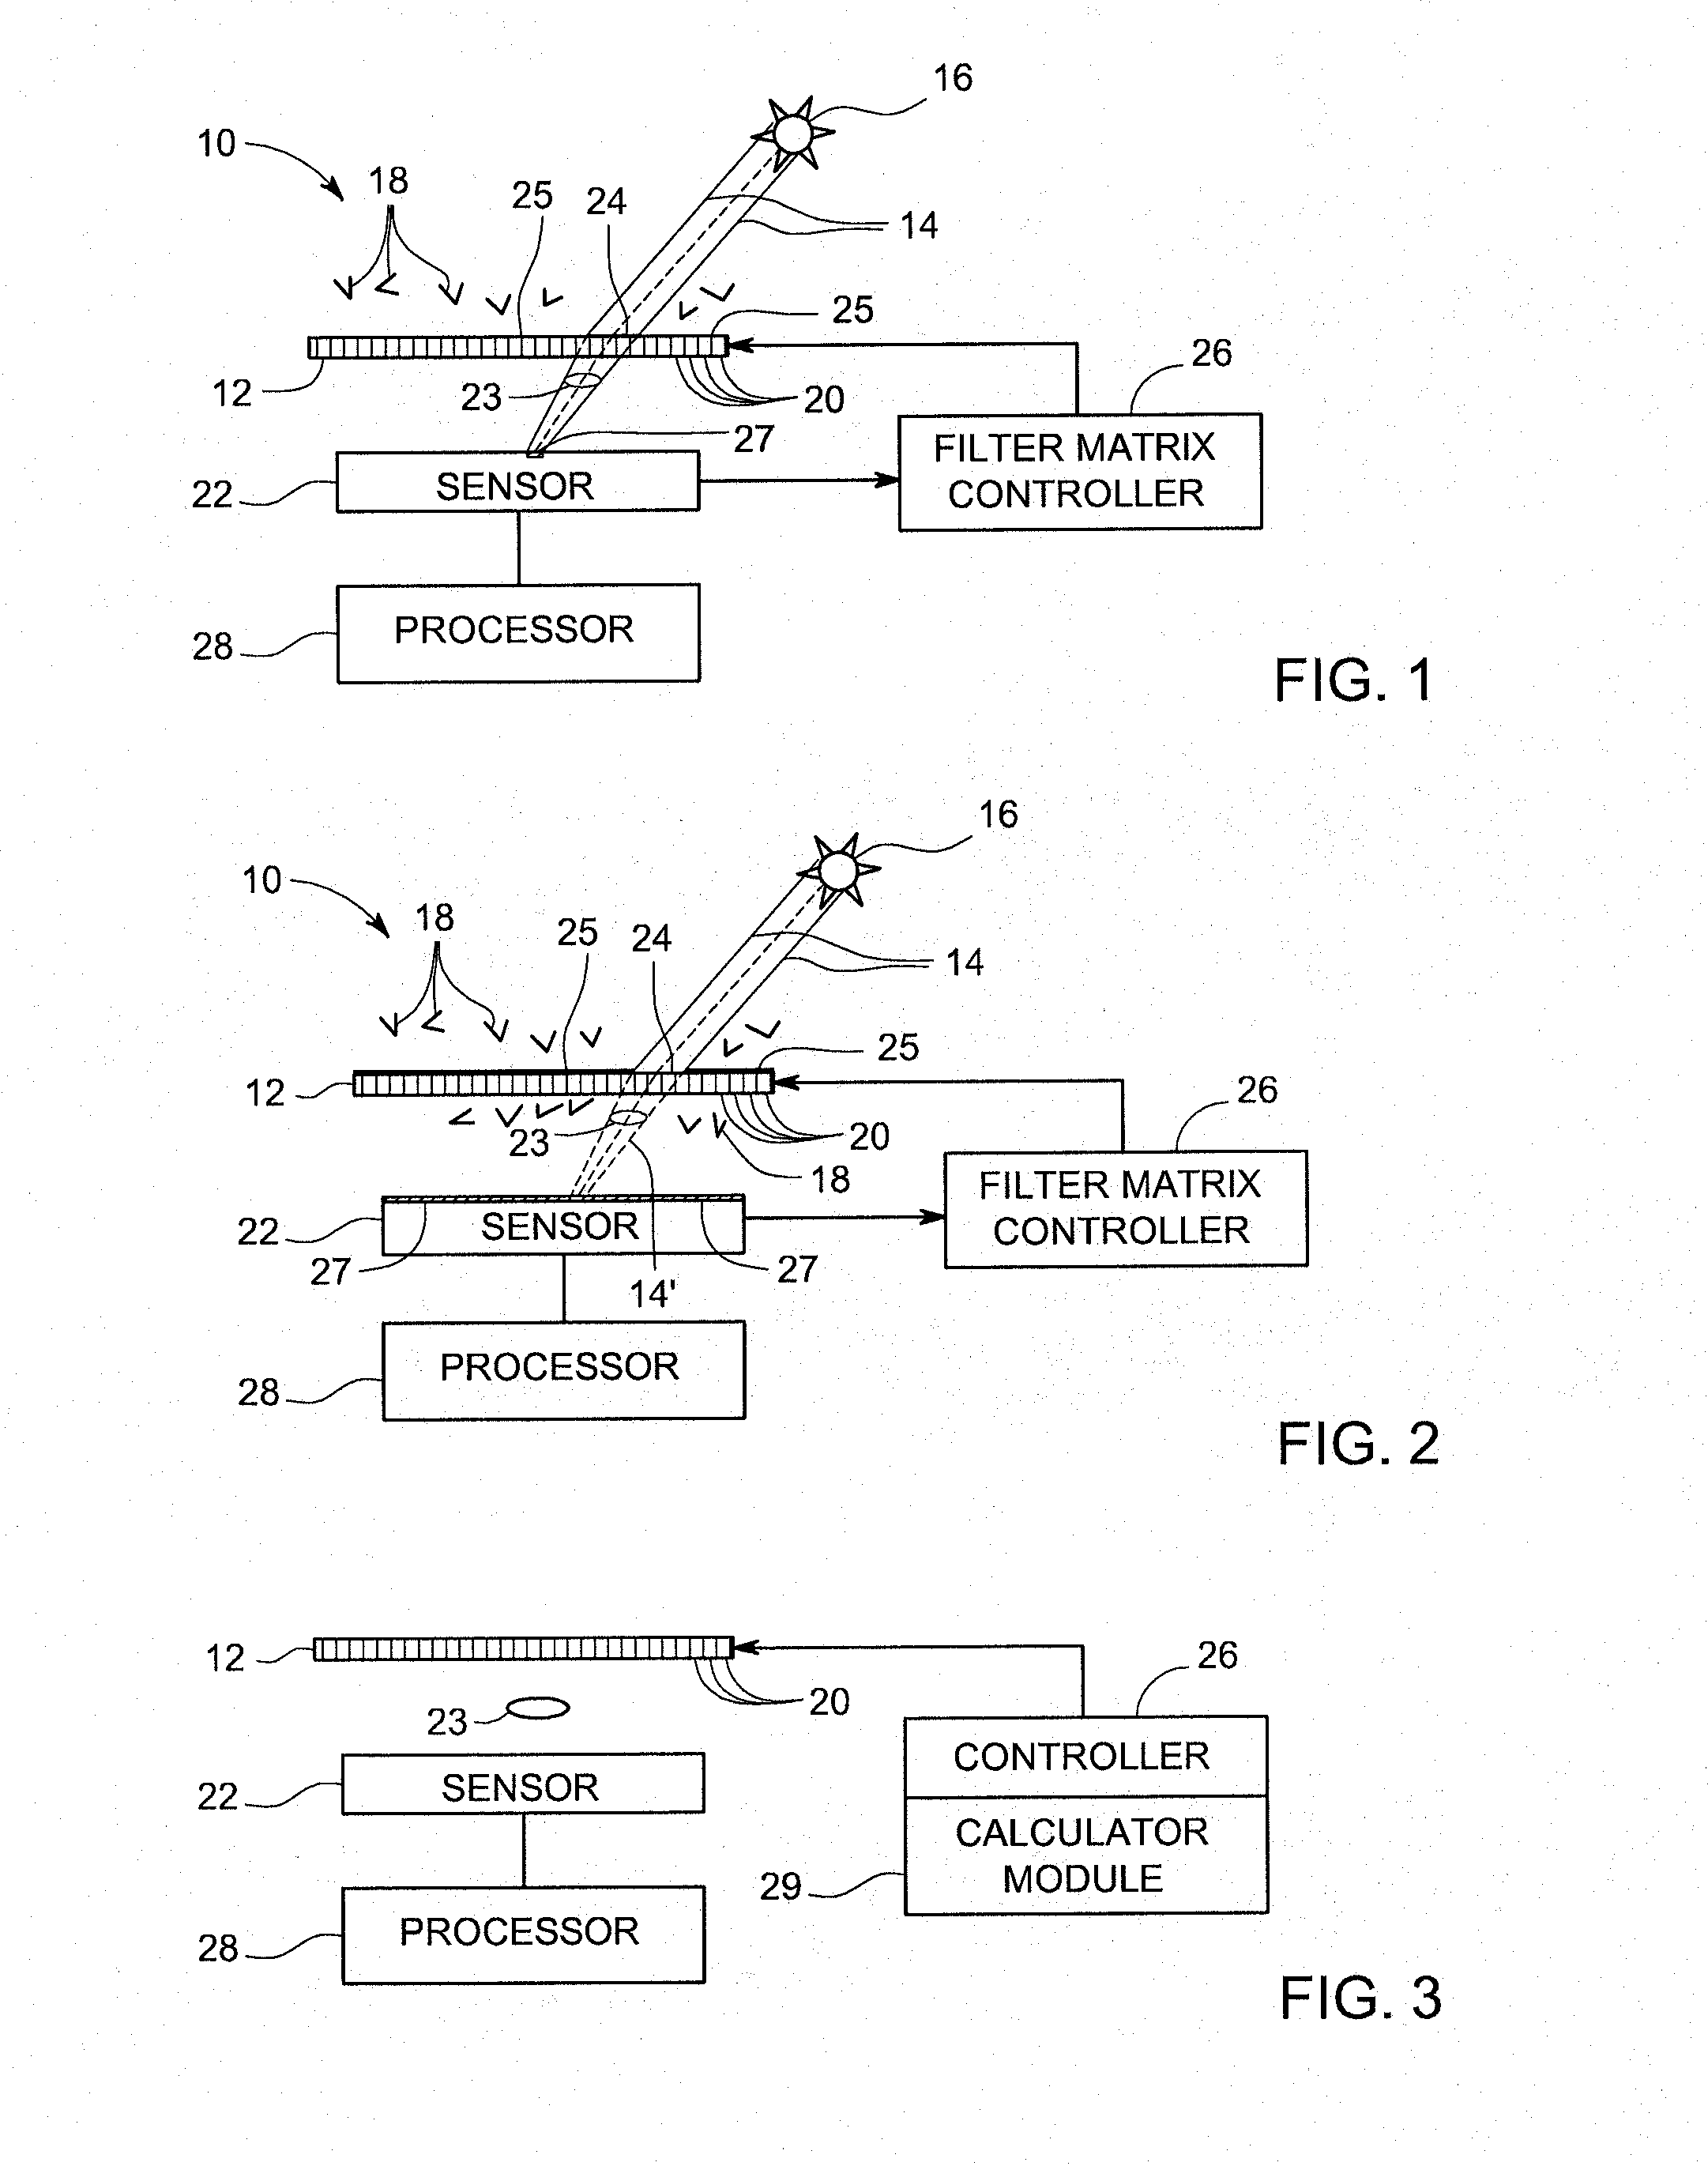 Apparatus having a controllable filter matrix to selectively acquire different components of solar irradiance